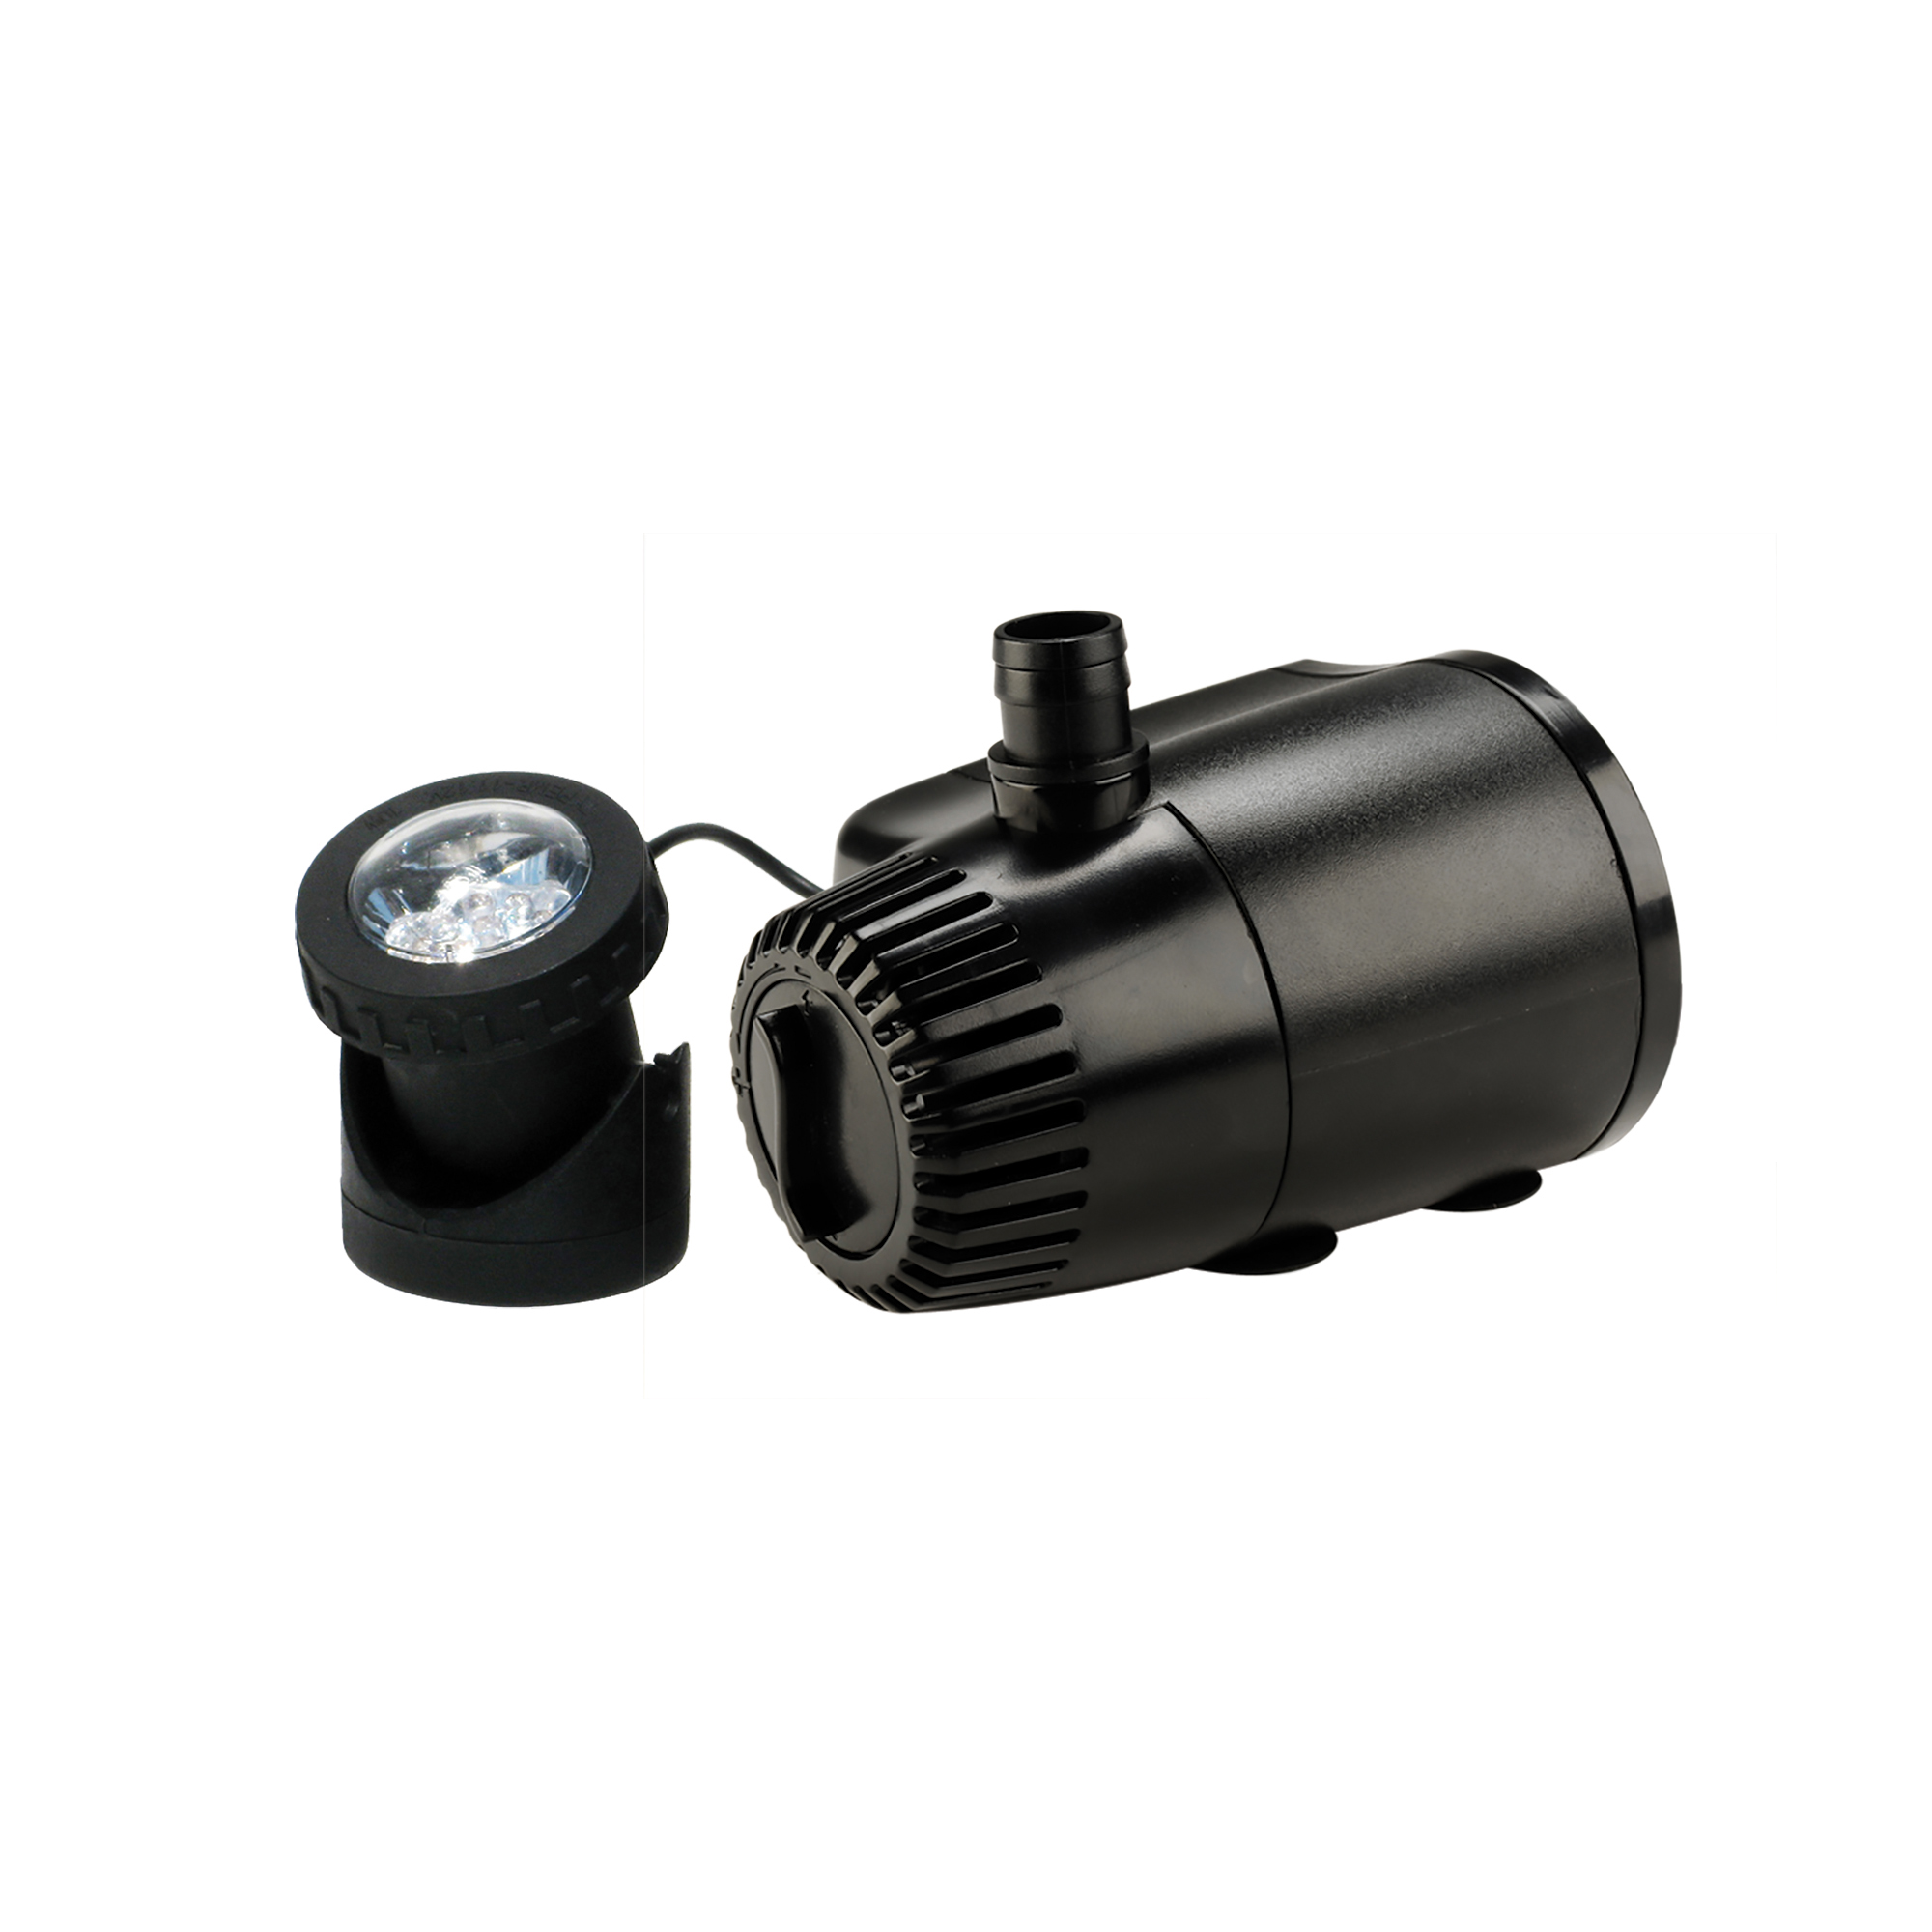 aquanique 140 GPH Fountain Pump Plus White LED Light With Low Water Auto Shut-Off - Black - image 1 of 1